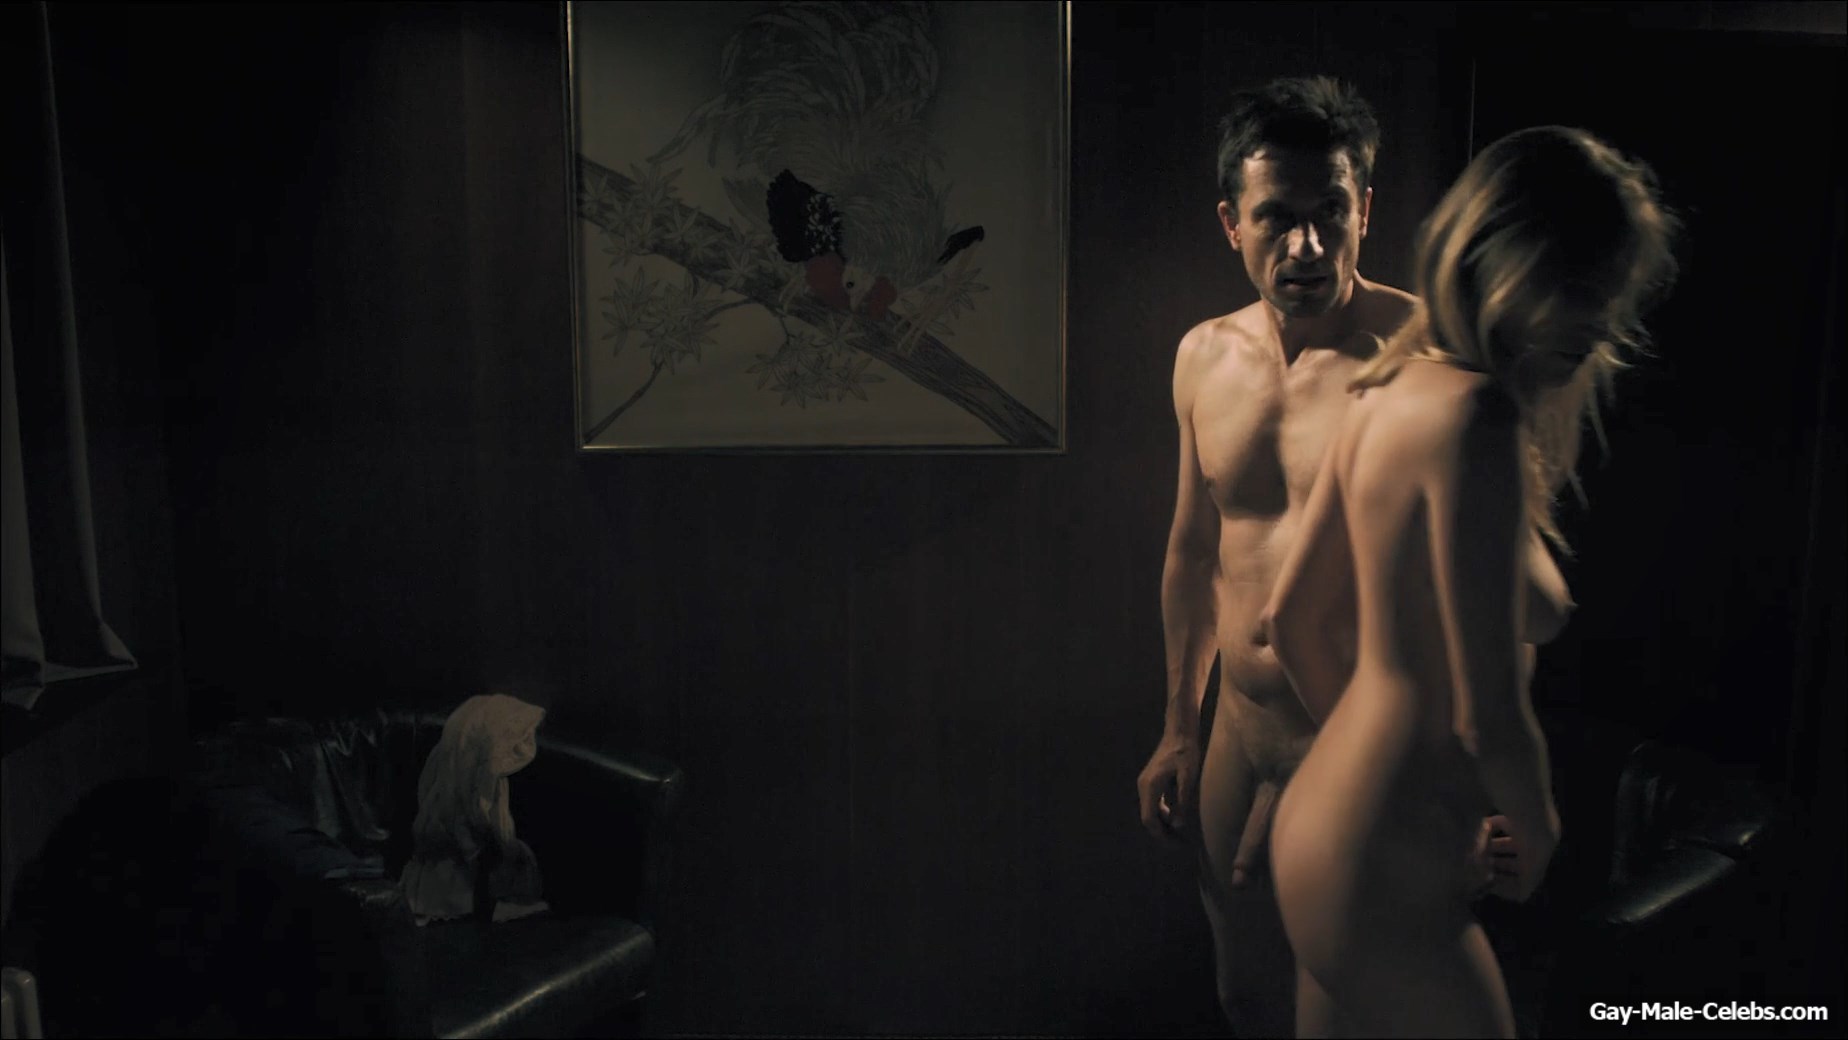 Oliver Mommsen naked scenes from various movies. 